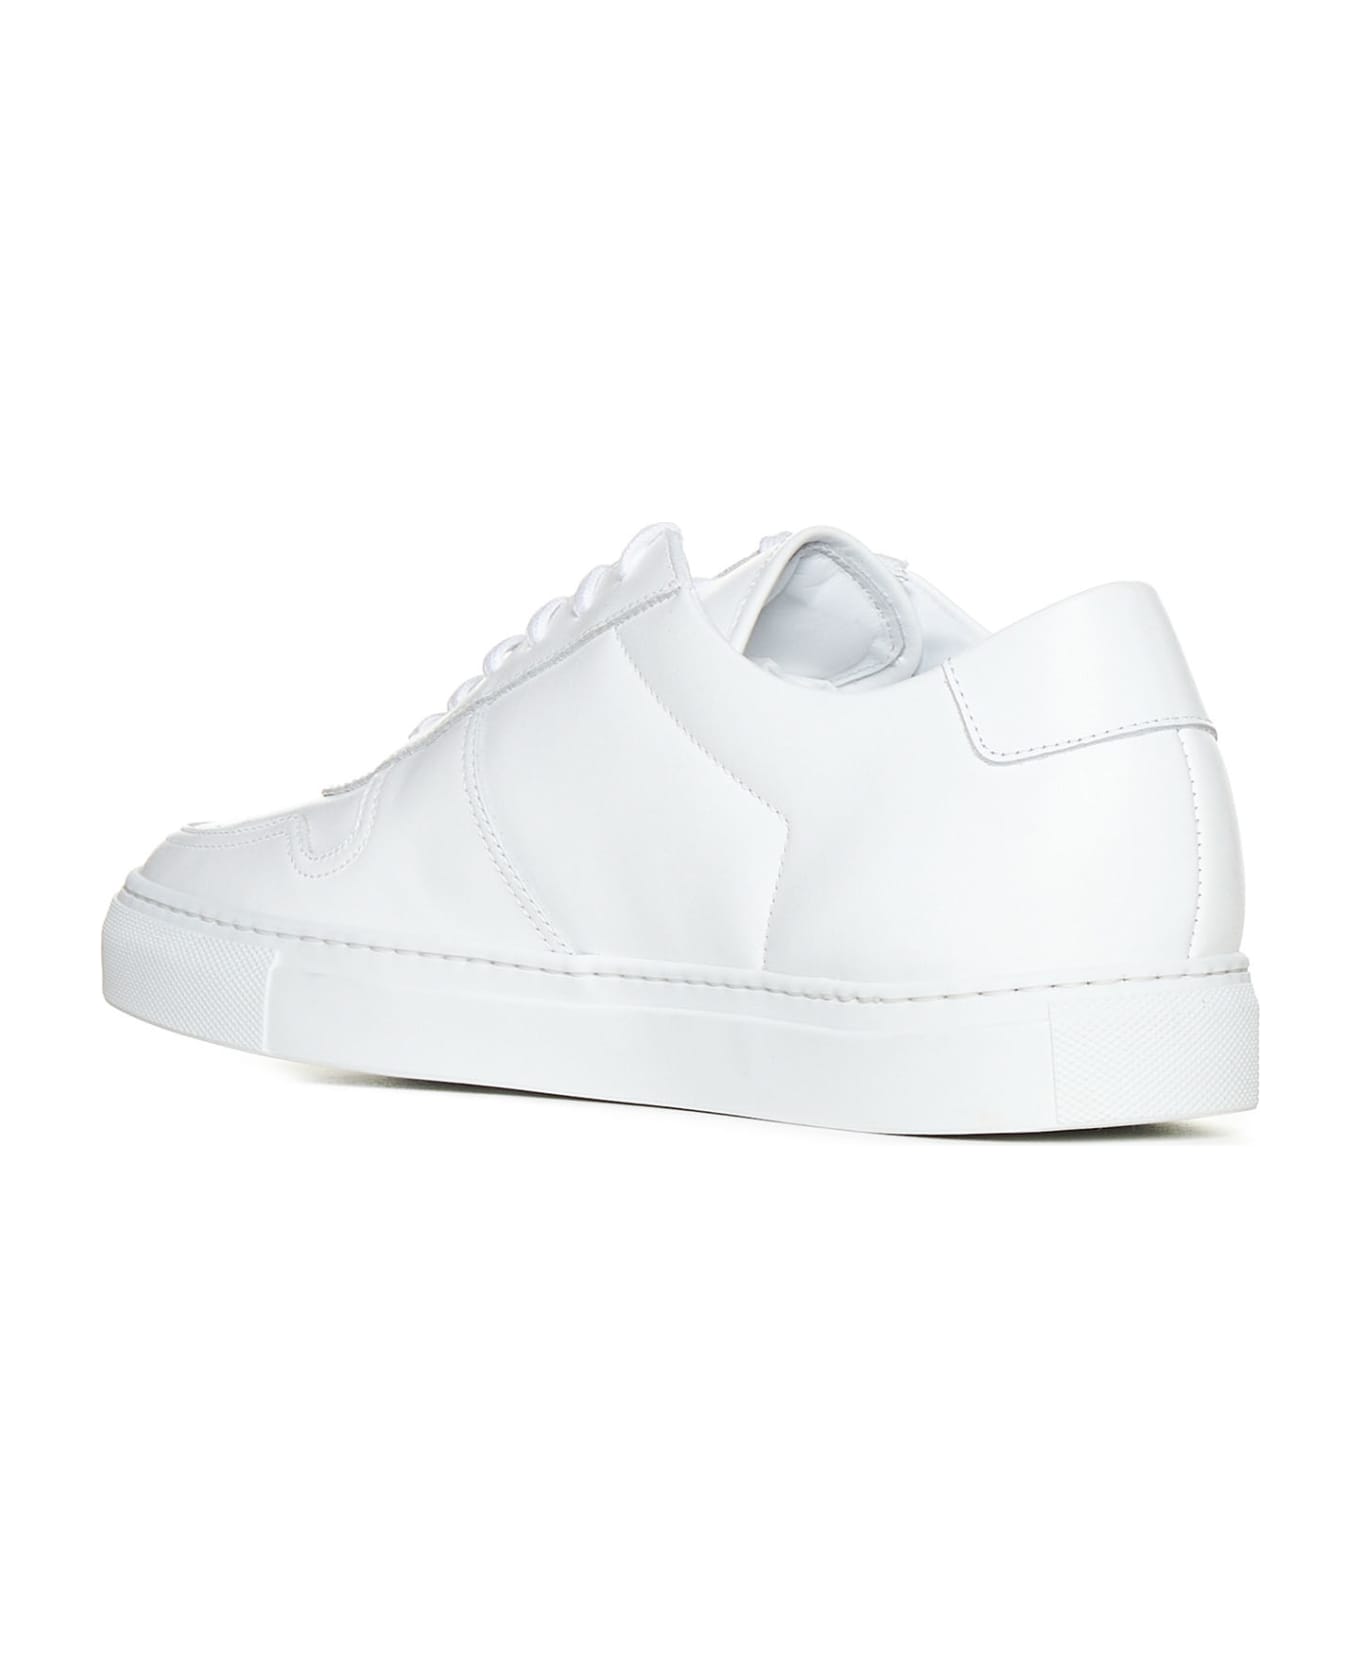 Common Projects Bball Low Sneakers - White